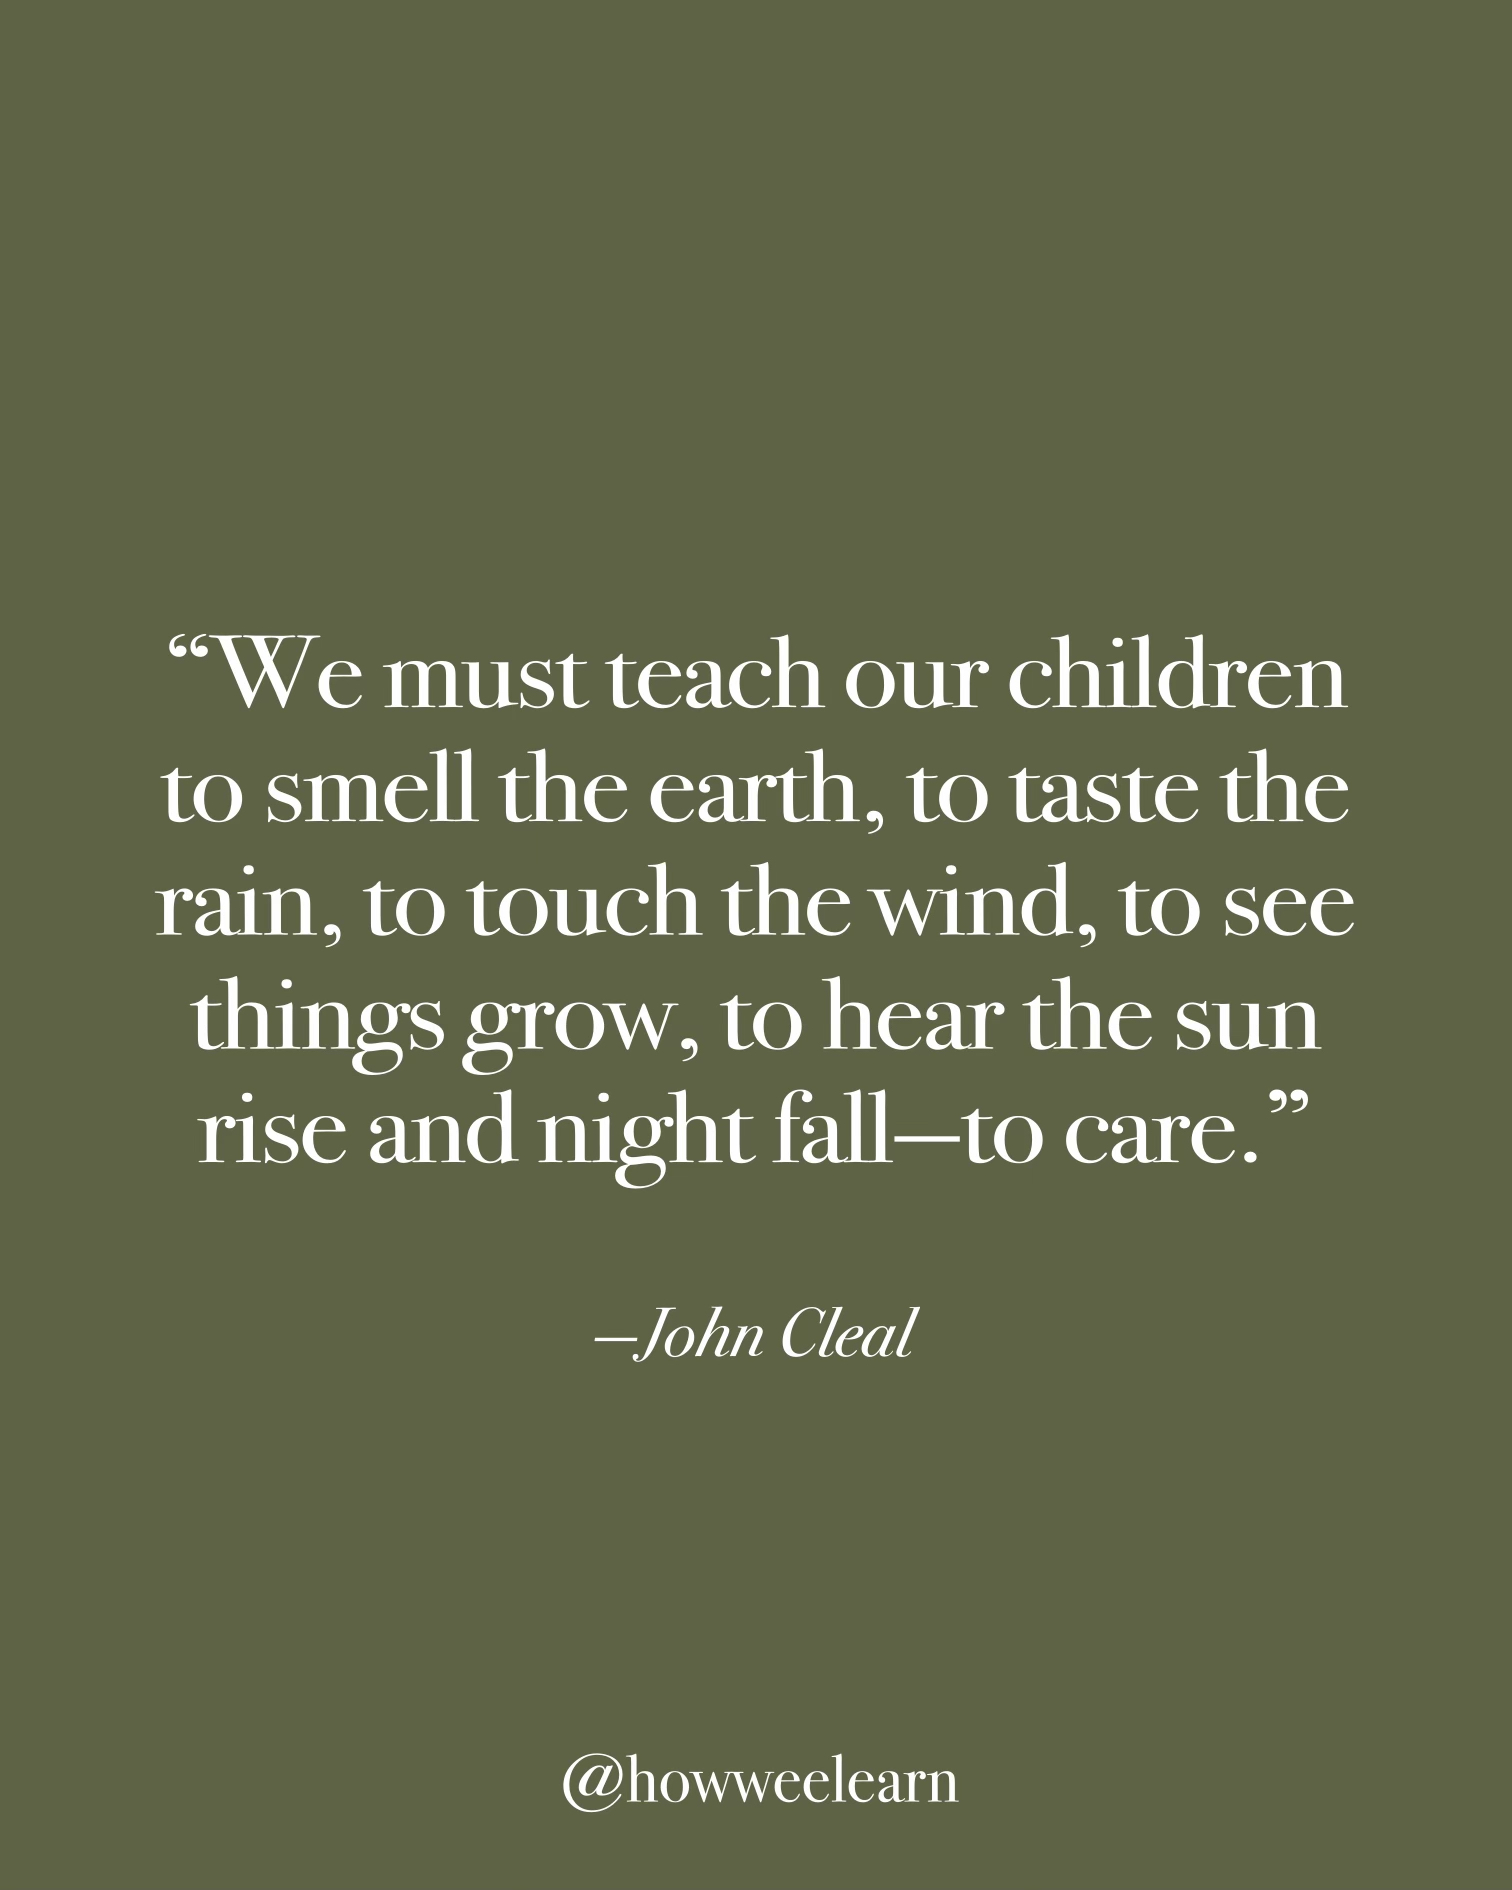 "We must teach our children to smell the earth, to taste the rain, to touch the wind, to see things grow, to hear the sun rise and night fall—to care." —John Cleal